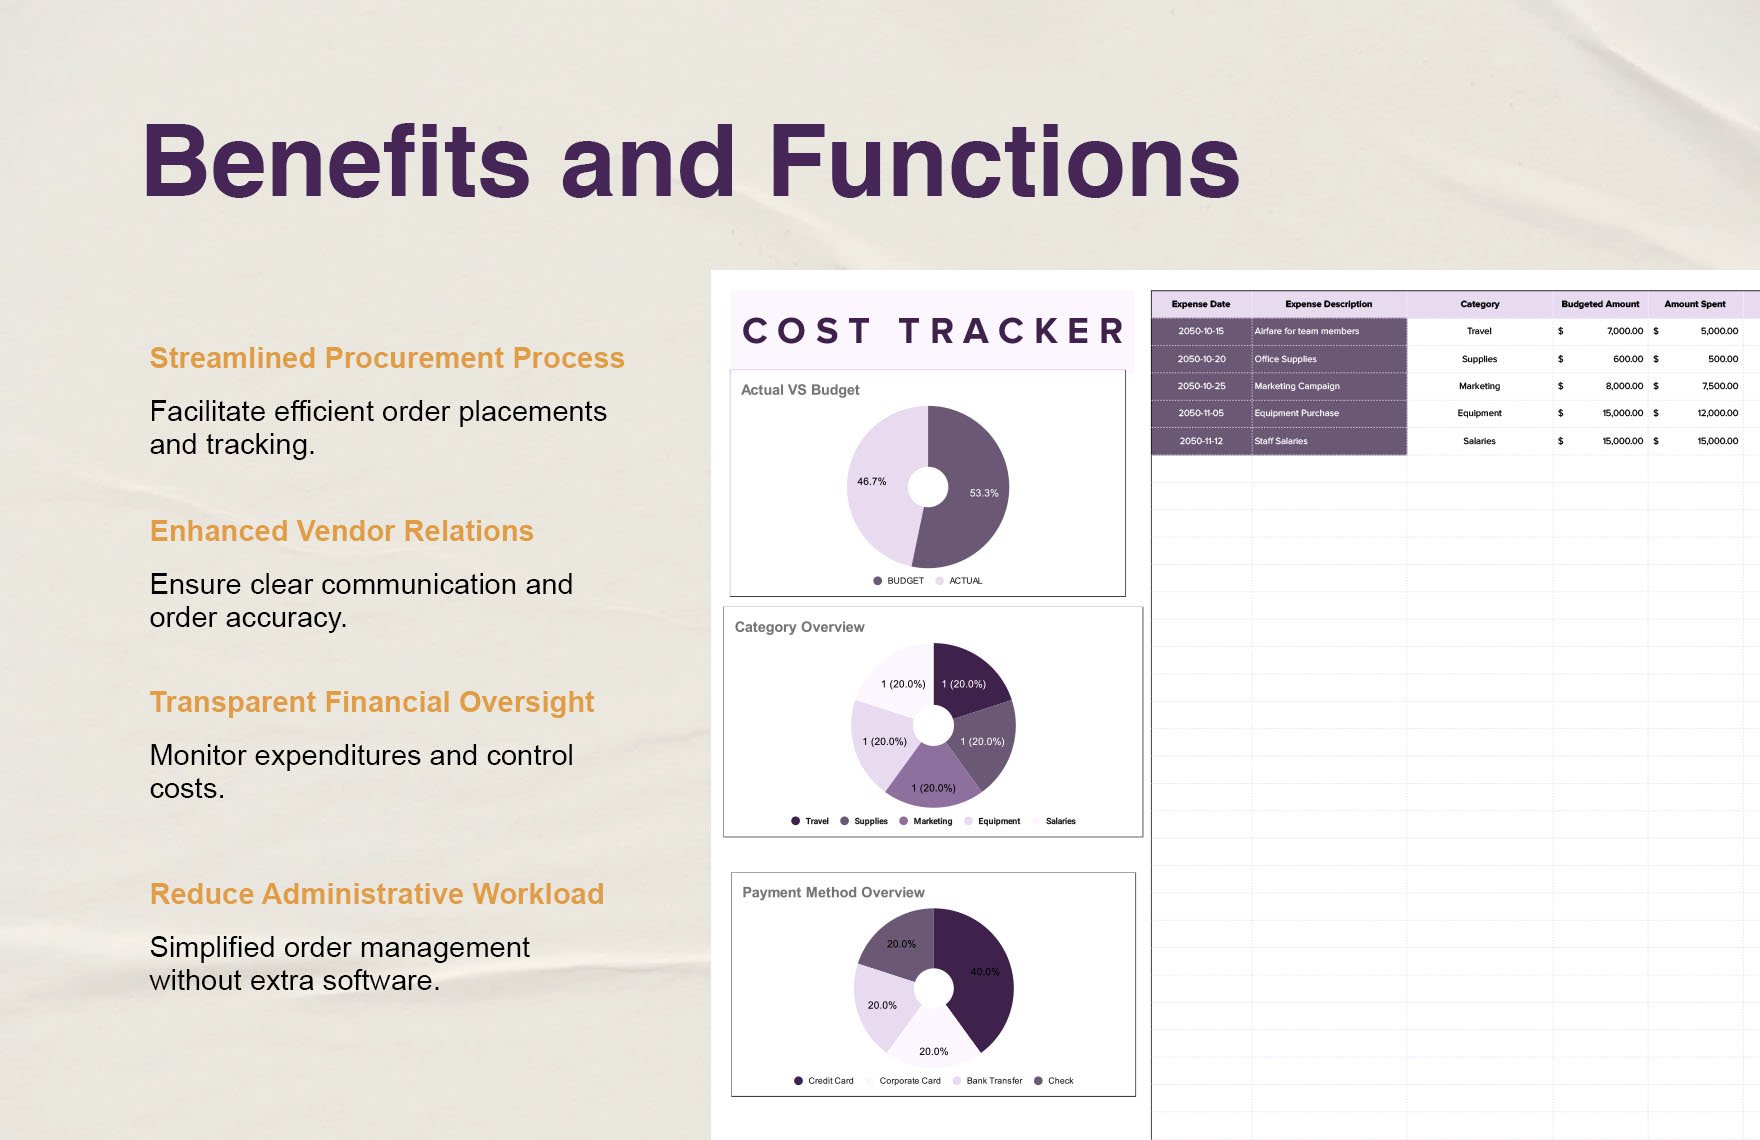 Cost Tracker Template